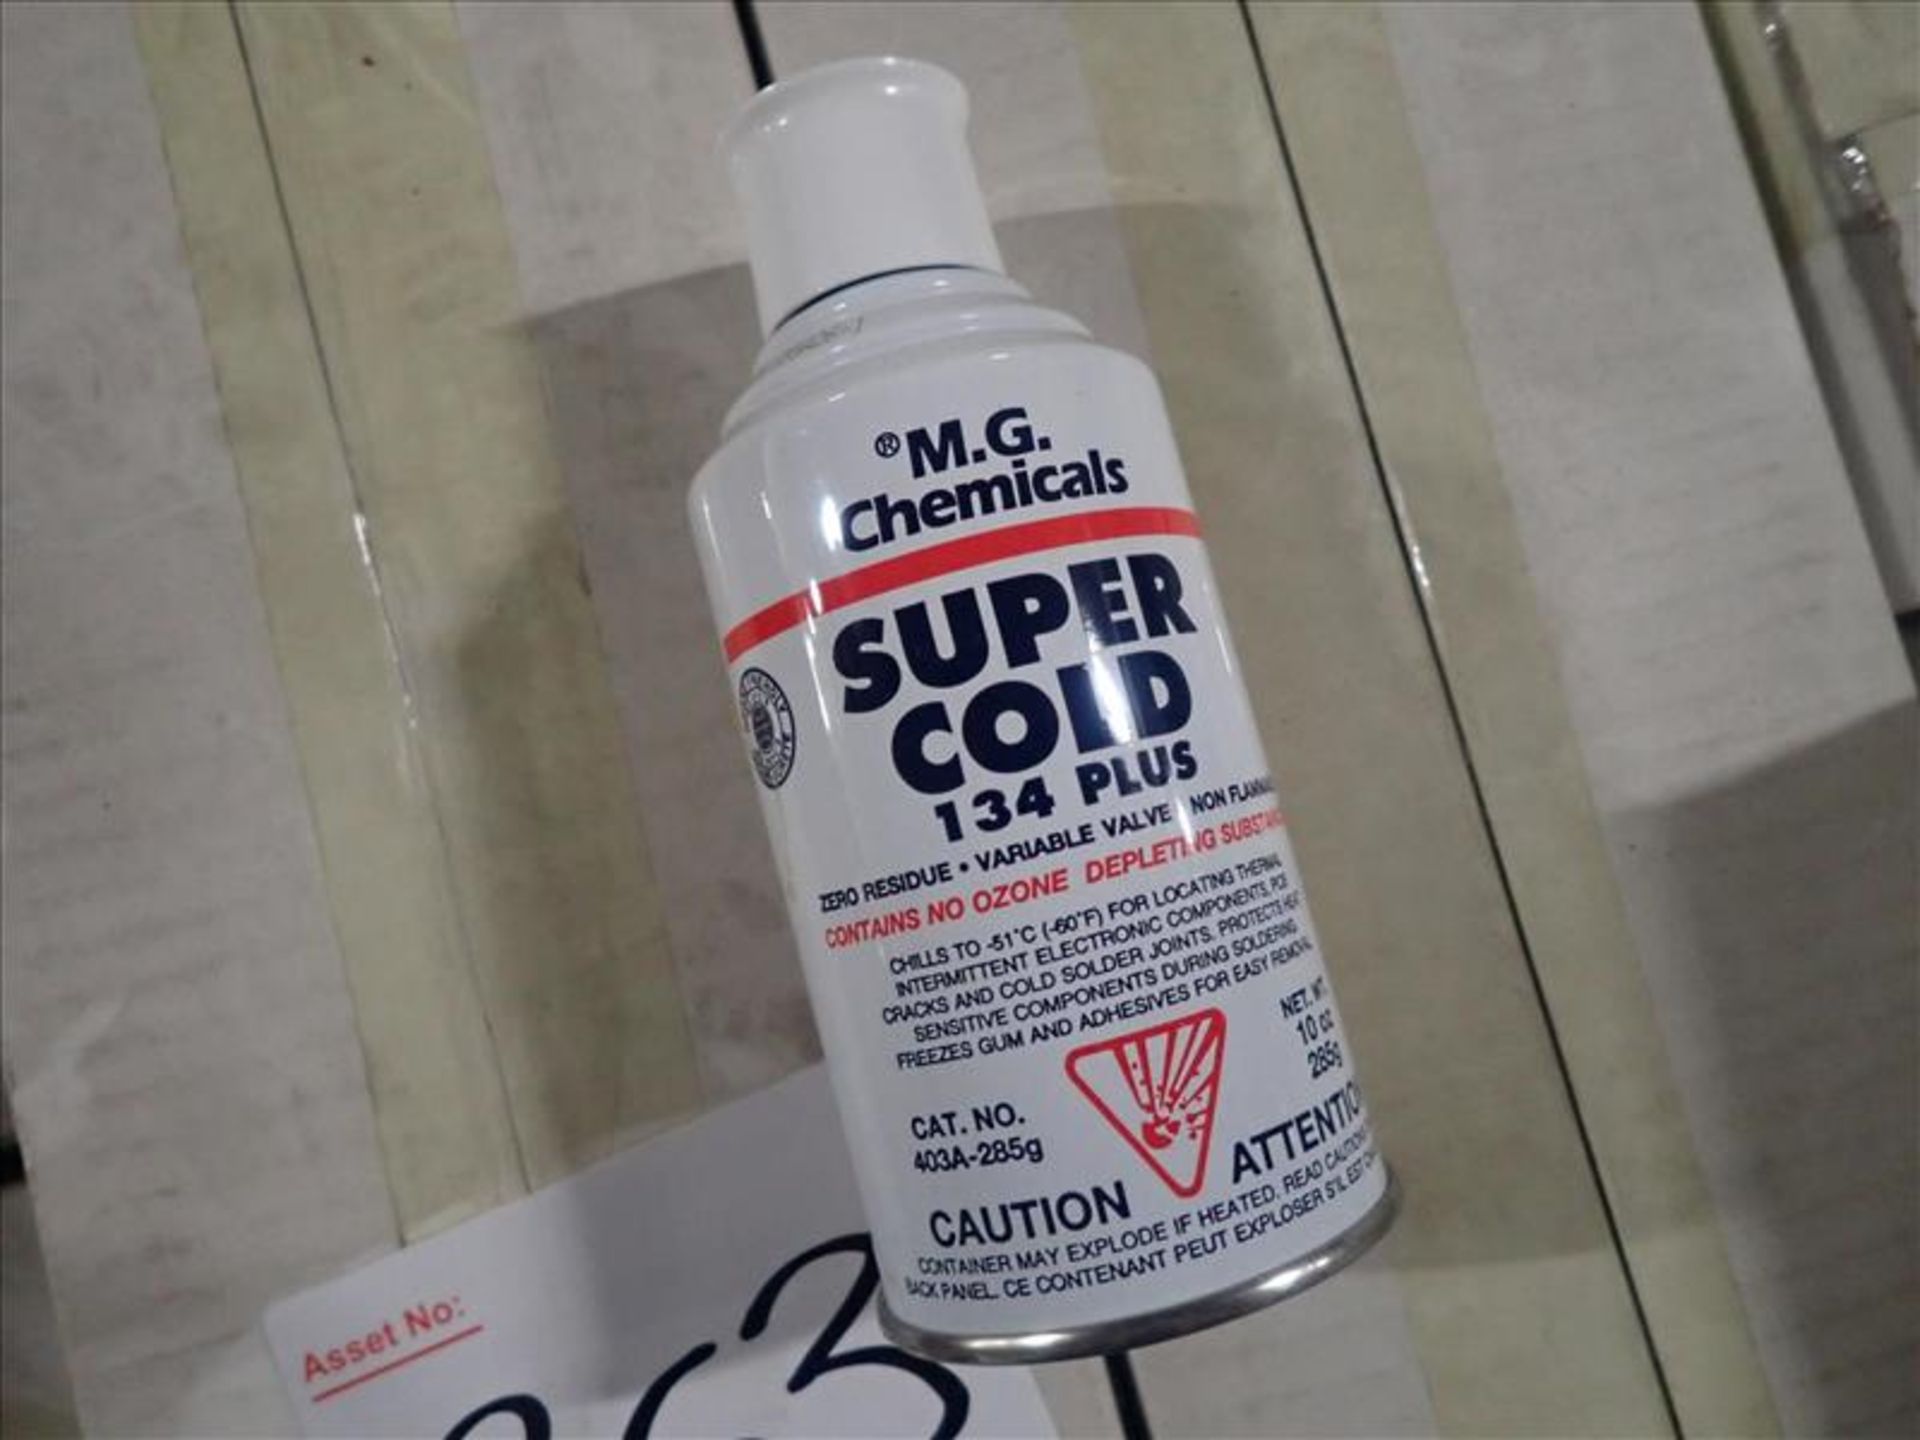 (240 cans) MG Chemicals Super Cold 134 Plus - Image 2 of 2